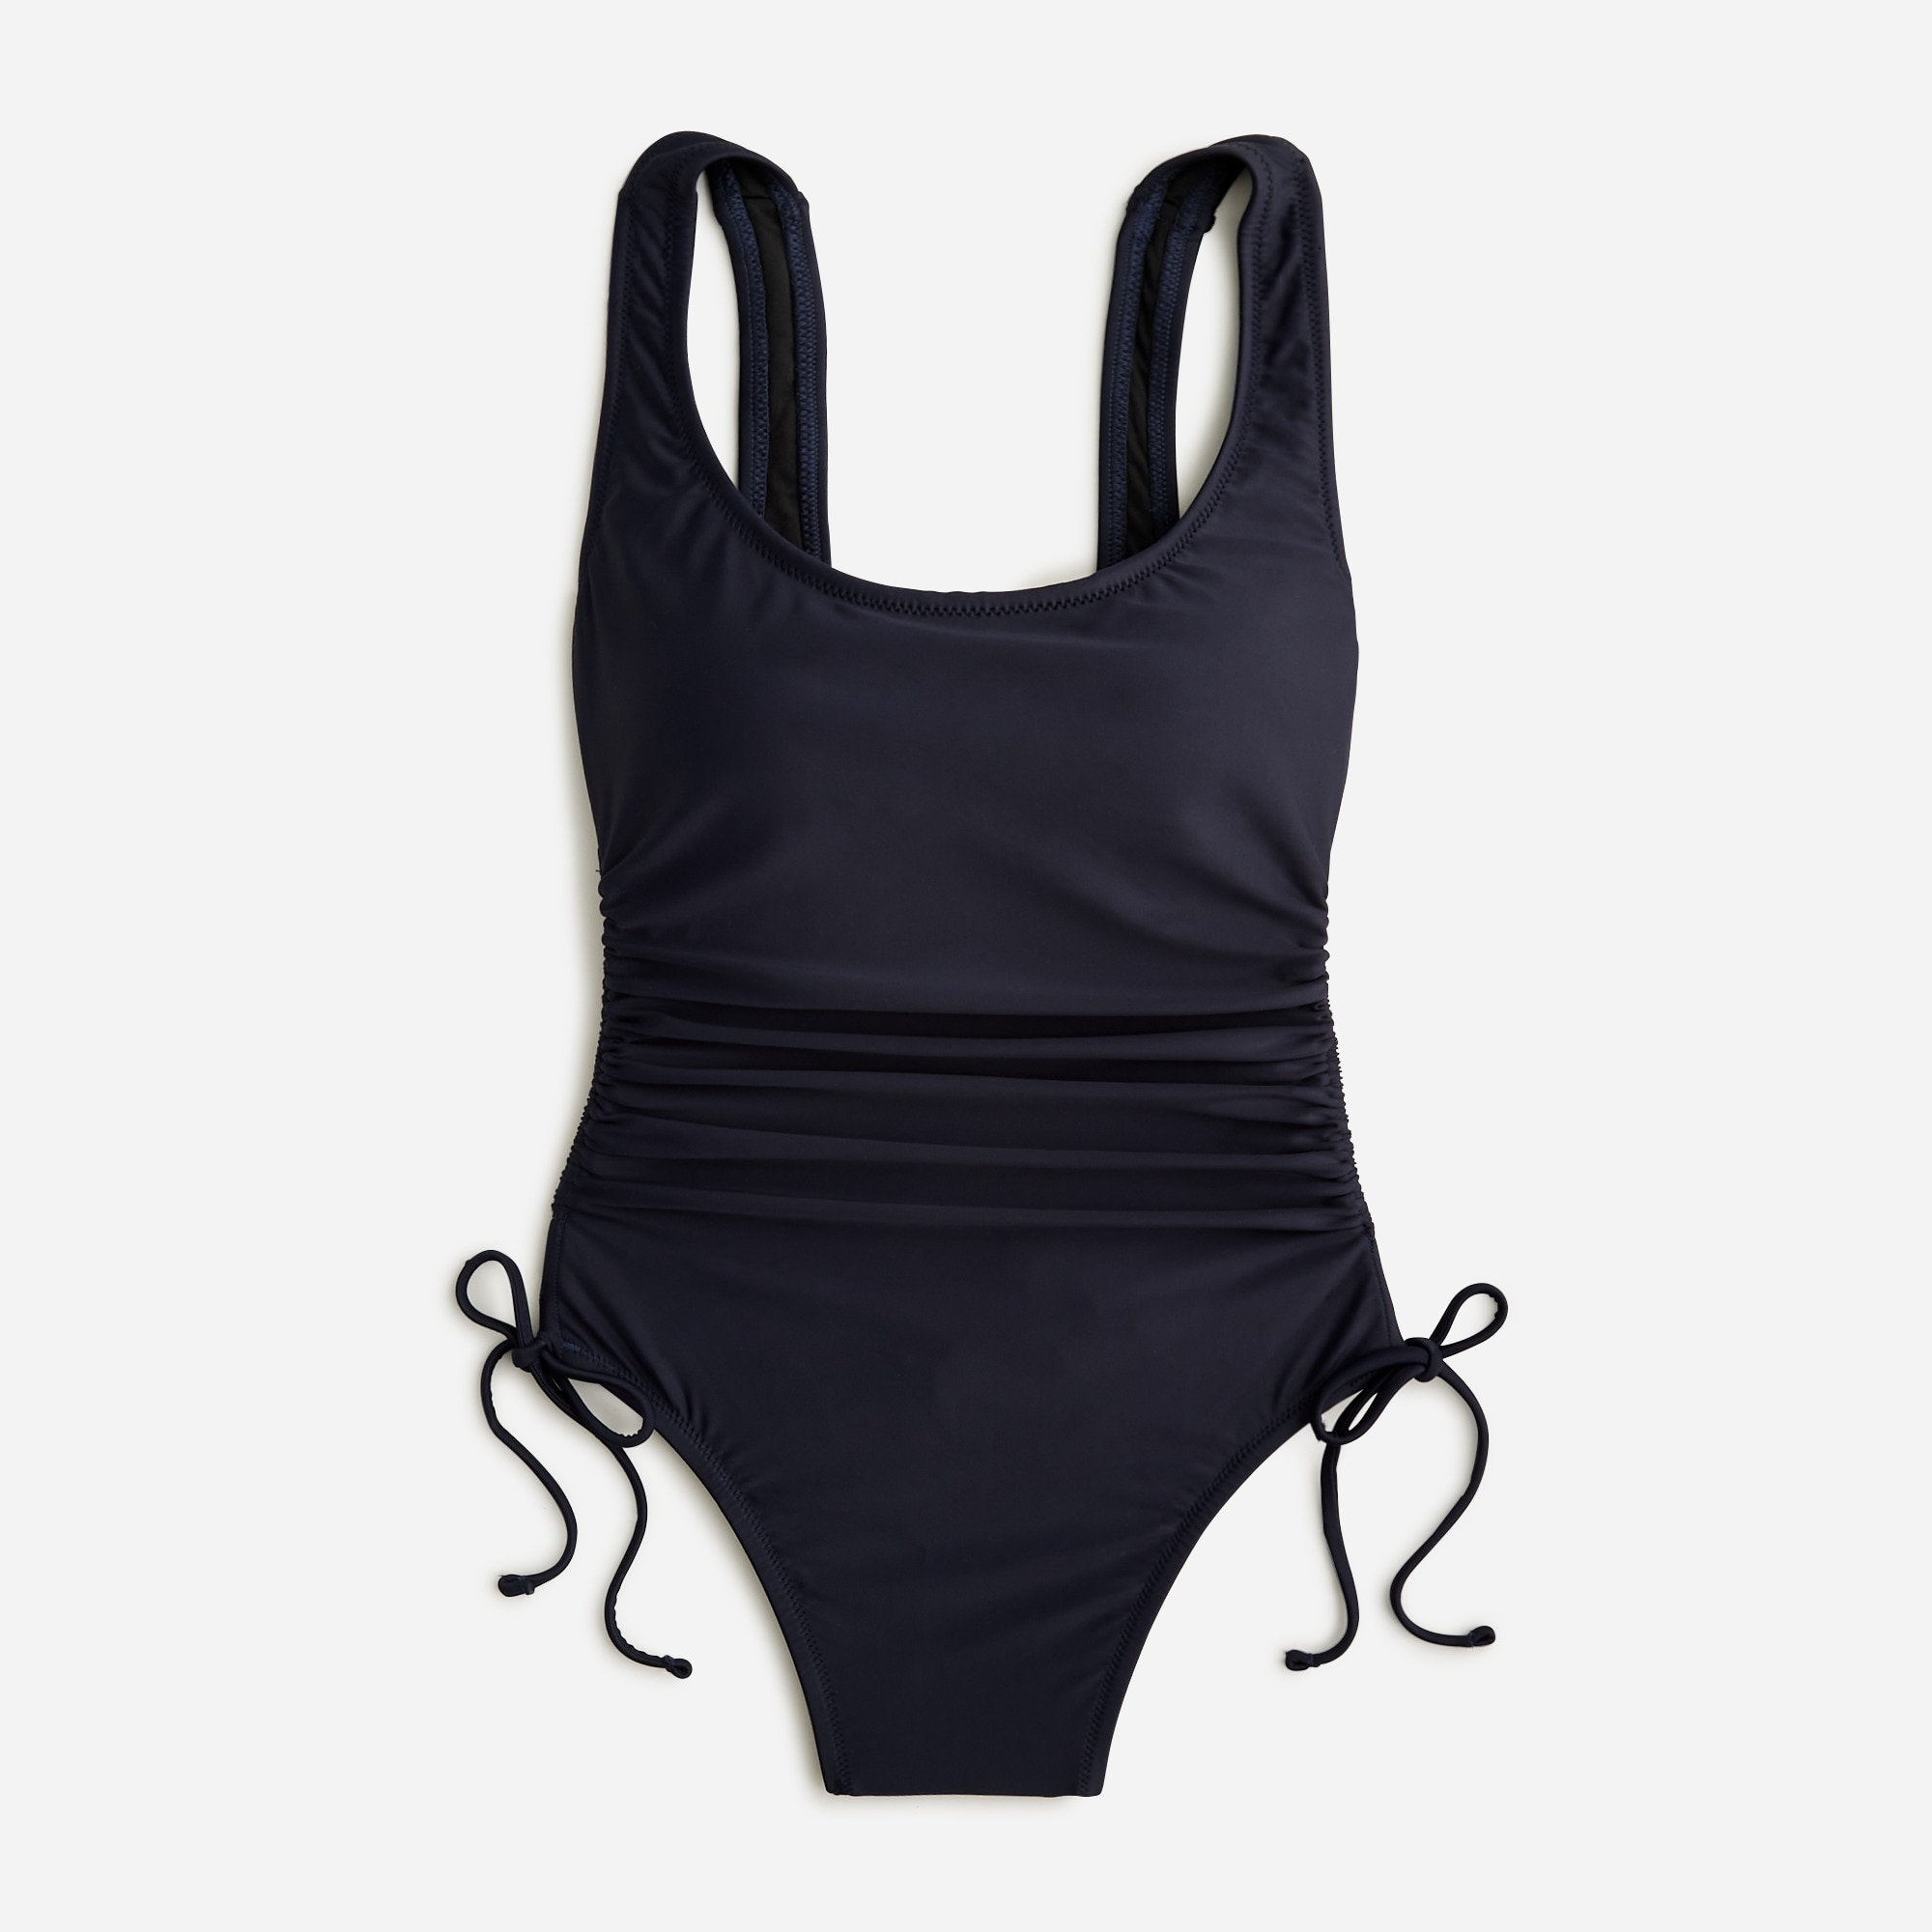  Ruched side-tie one-piece swimsuit